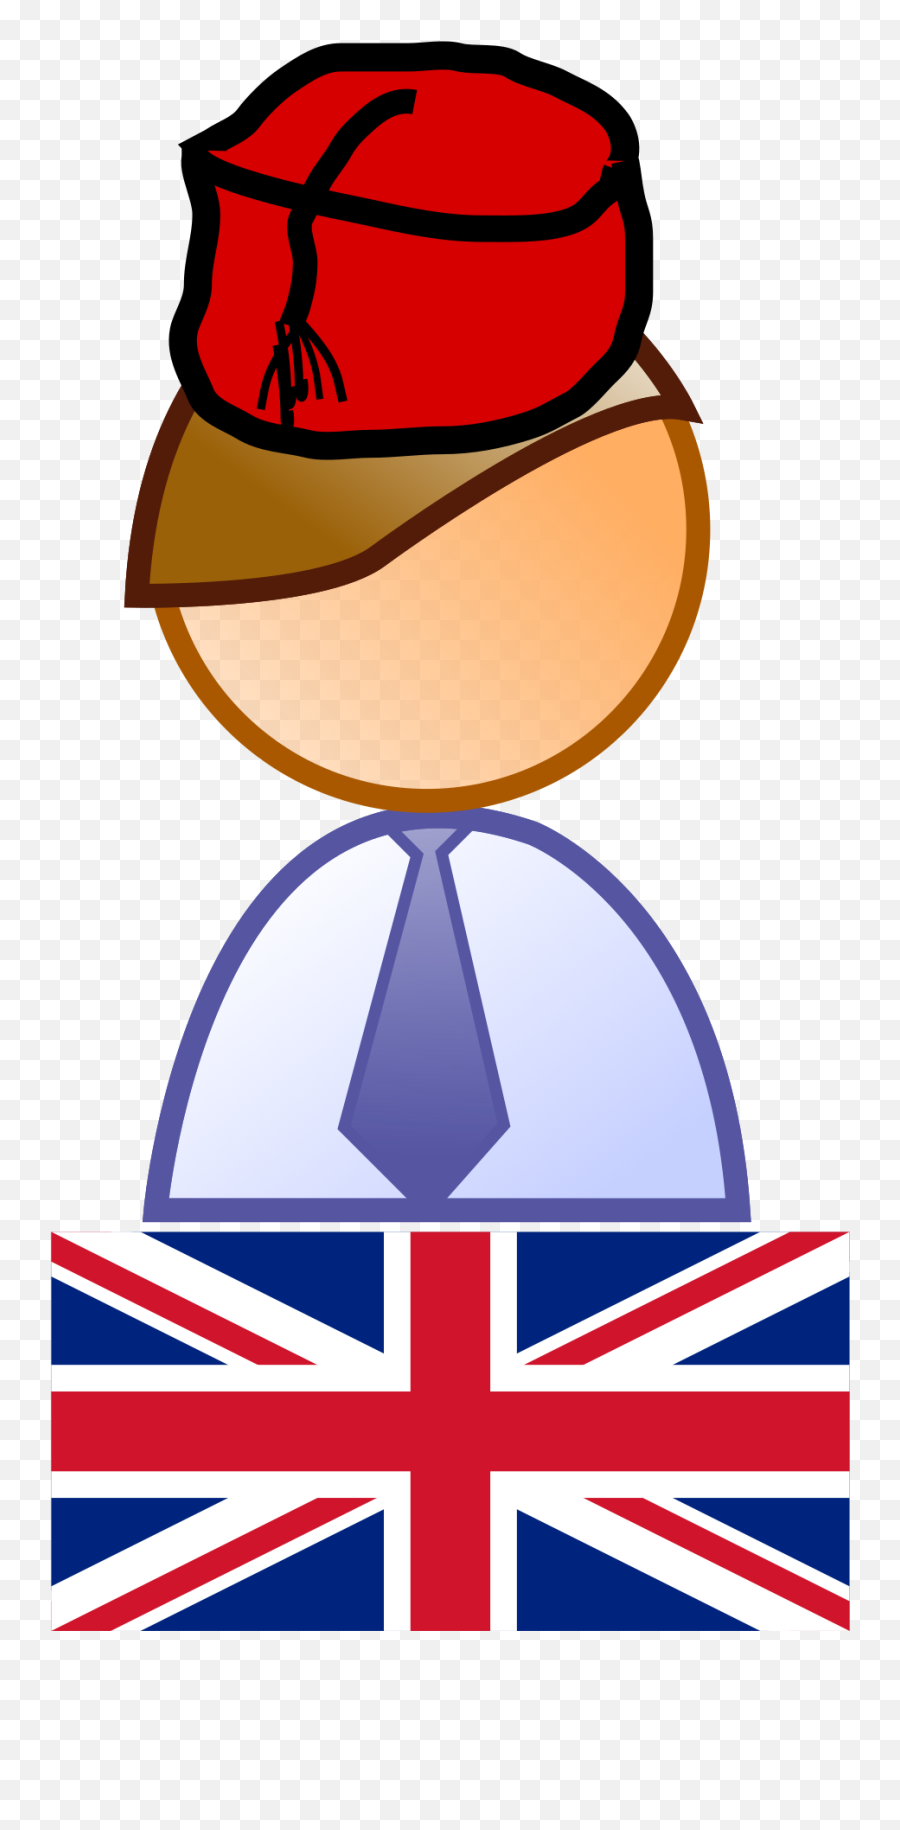 Fileuk - Comedianstubsvg Wikipedia Uk Flag 9 16 Png,Comedian Icon